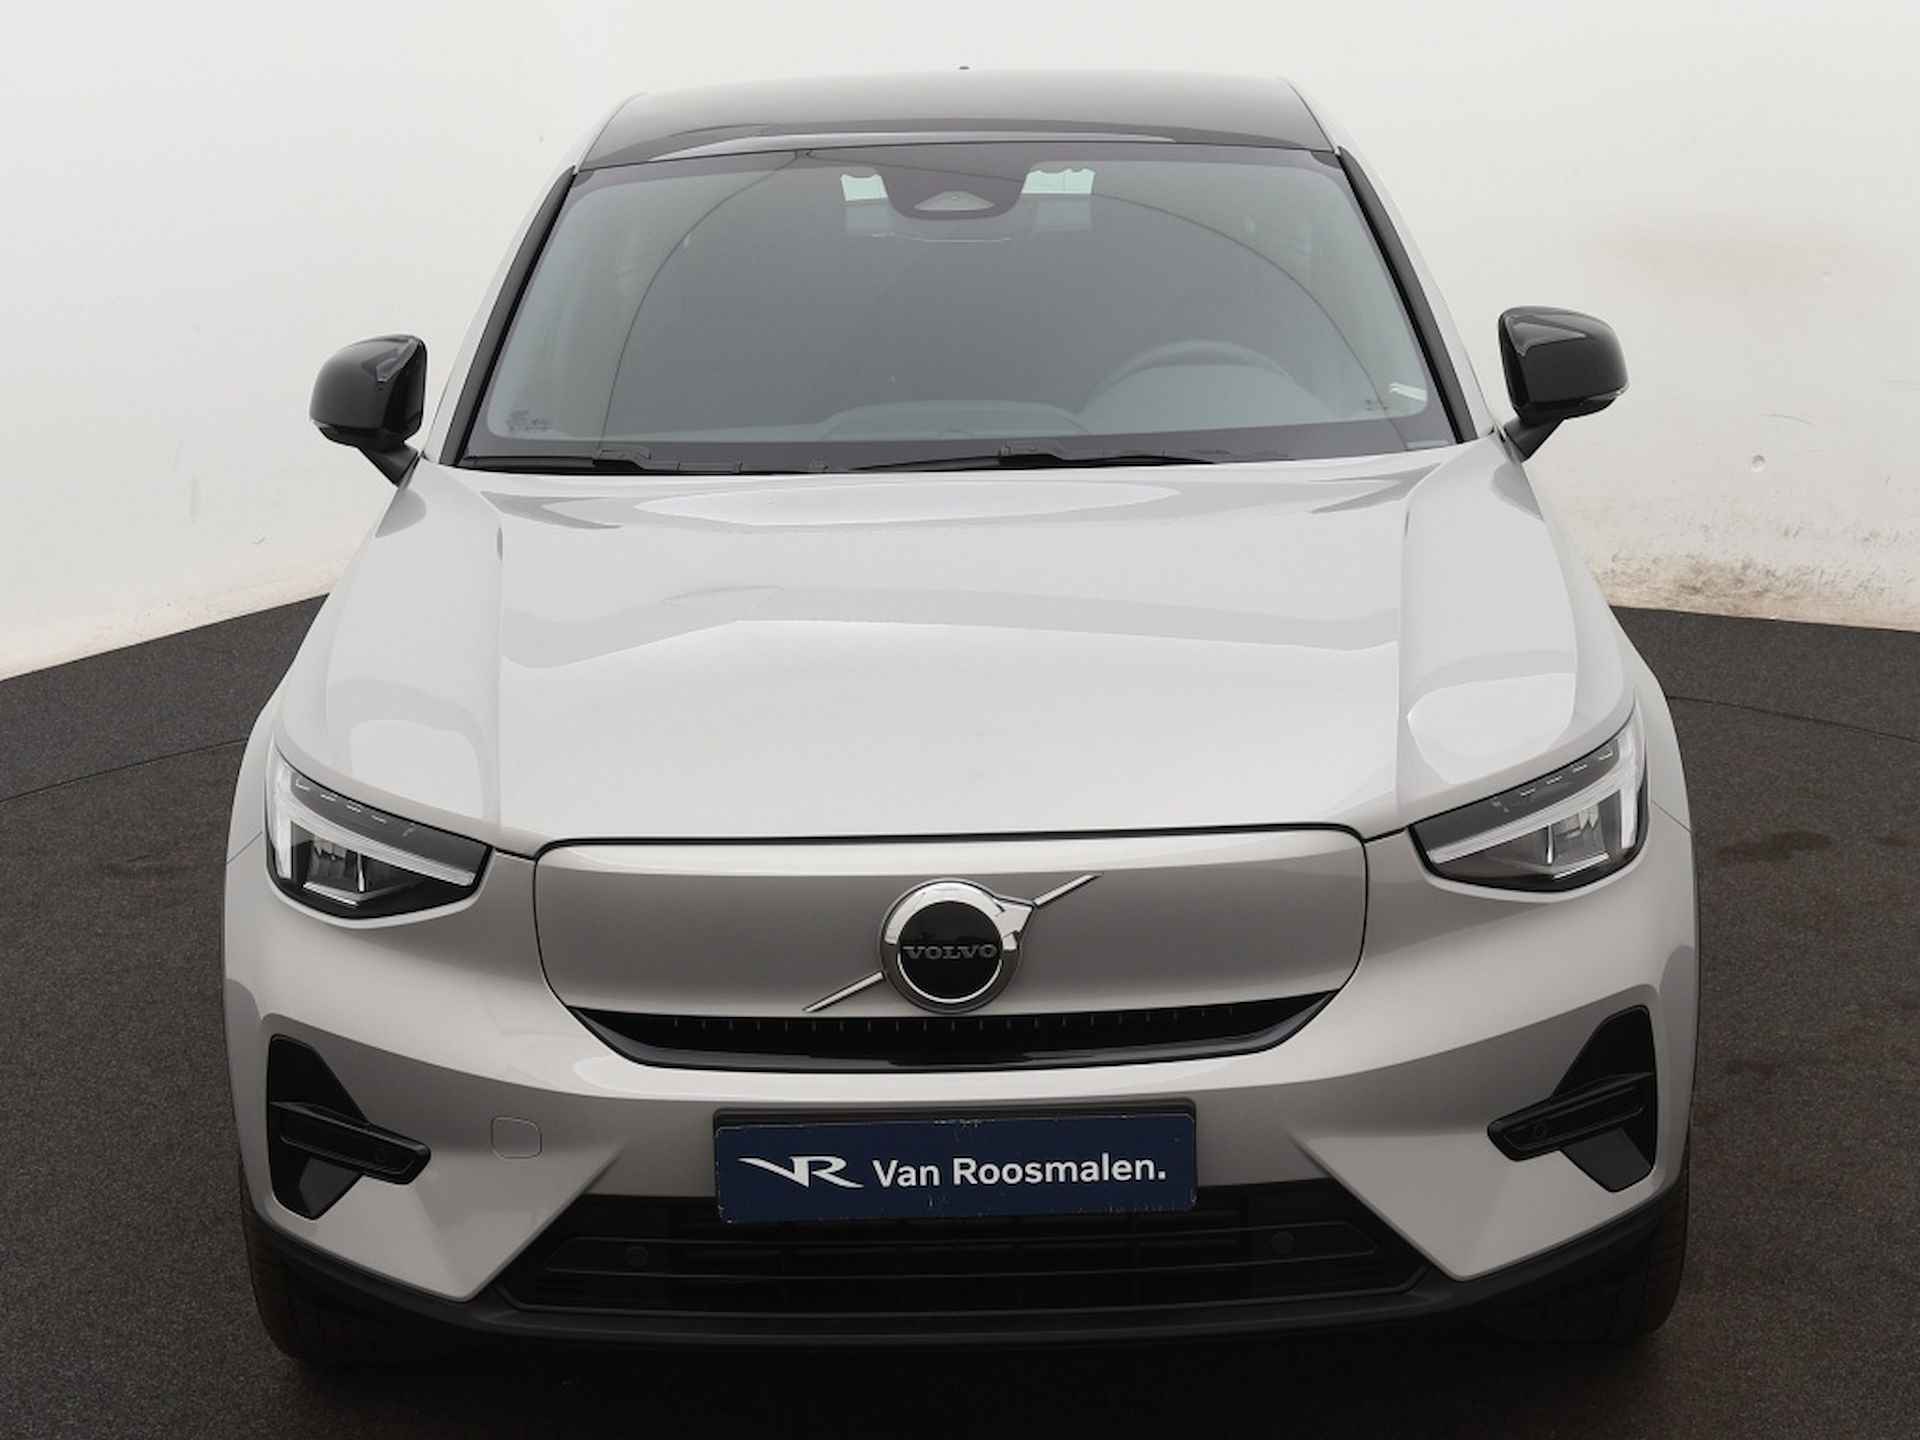 Volvo C40 Extended Plus 82 kWh - 9/38